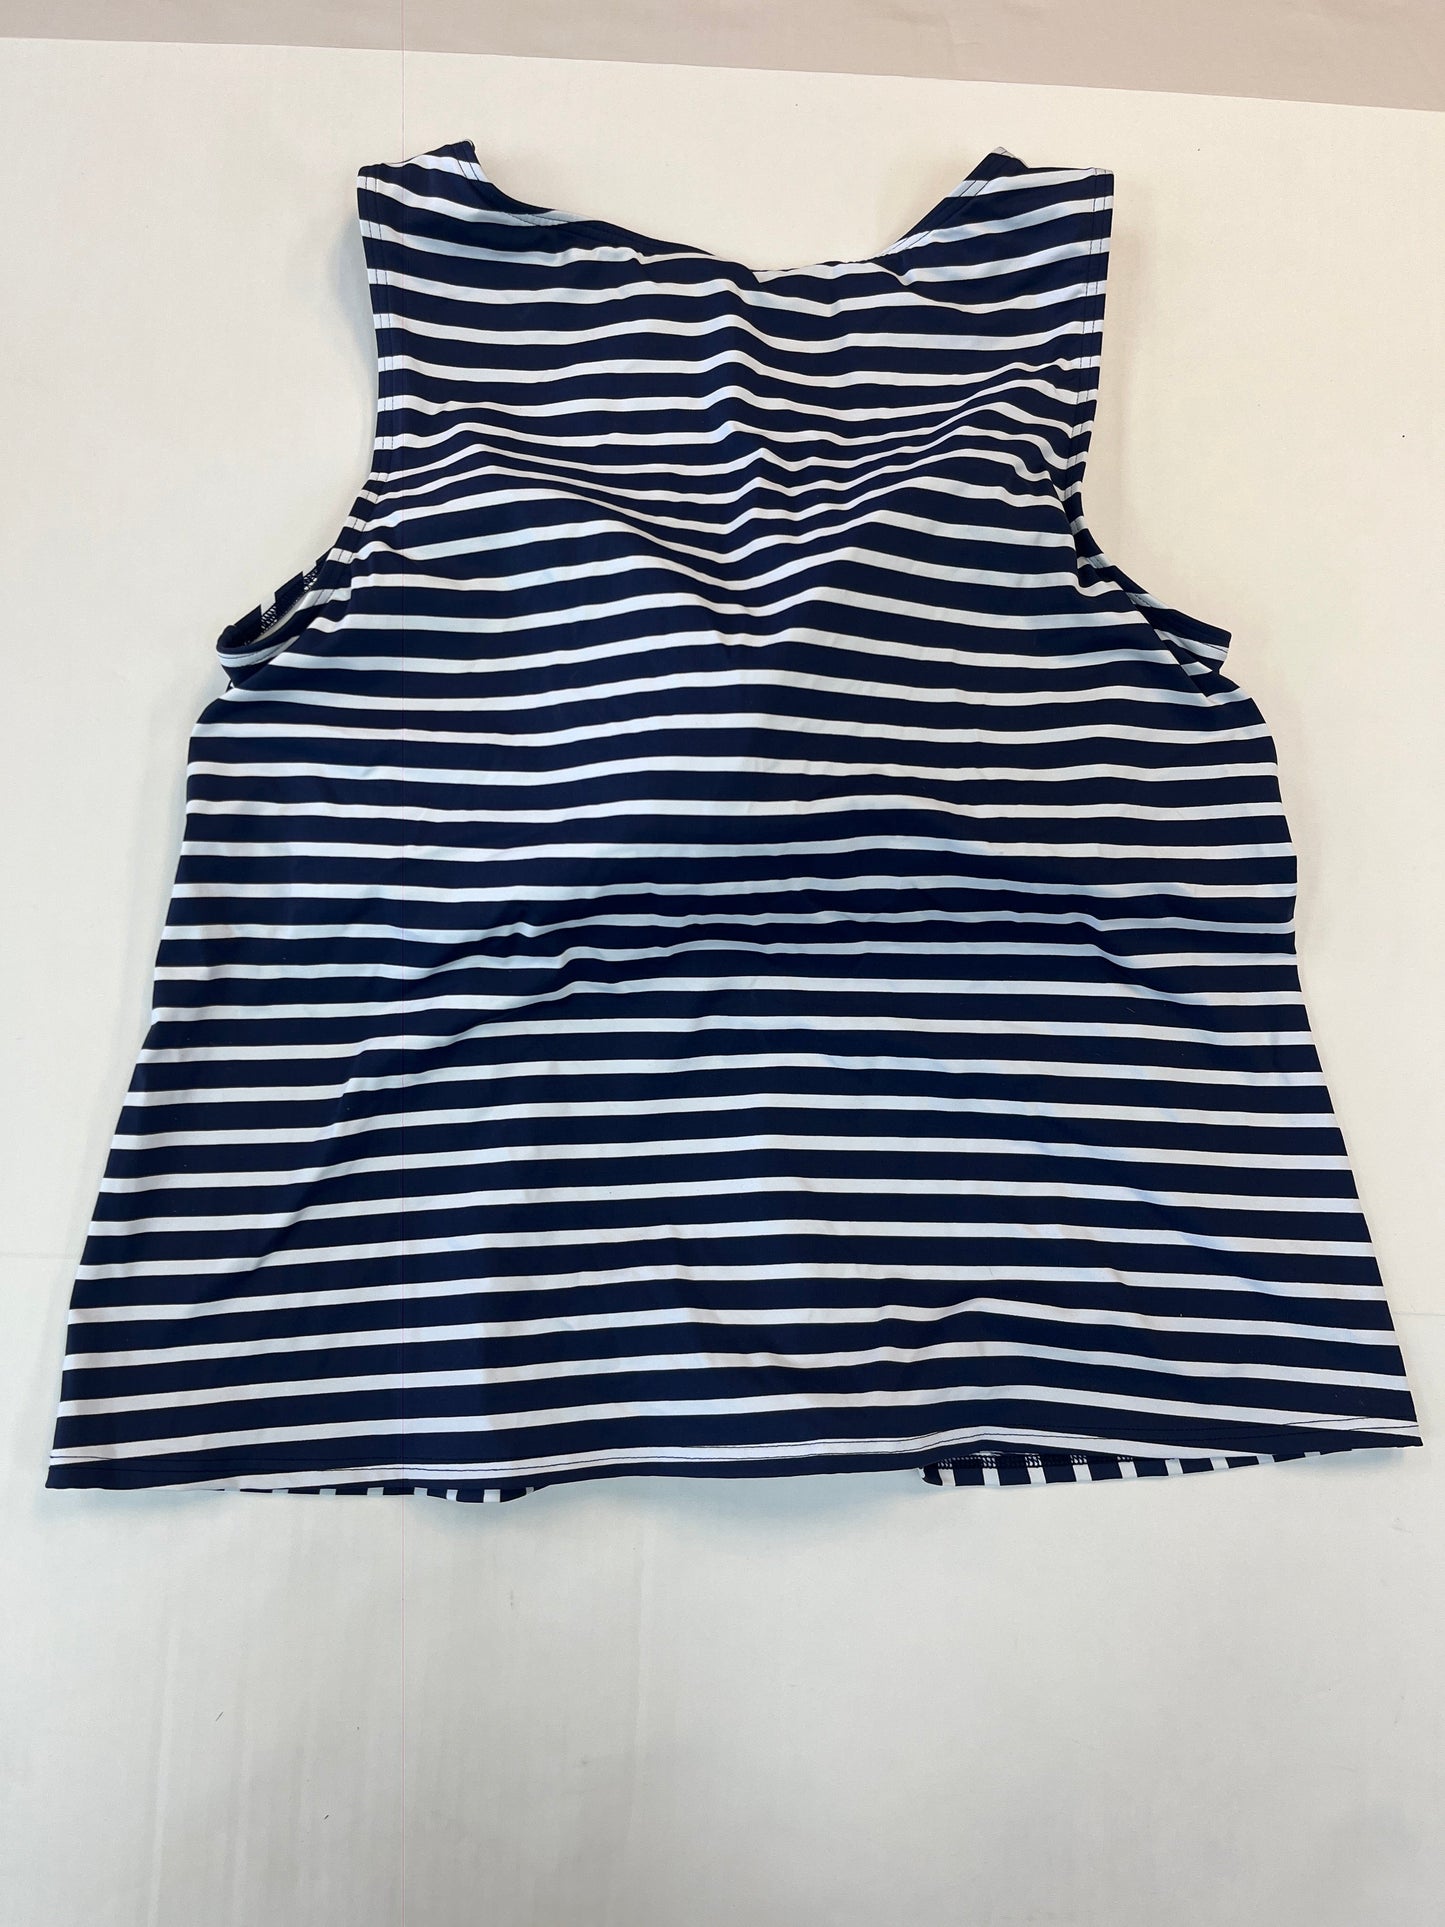 Swimsuit Top By Lands End  Size: Xxl